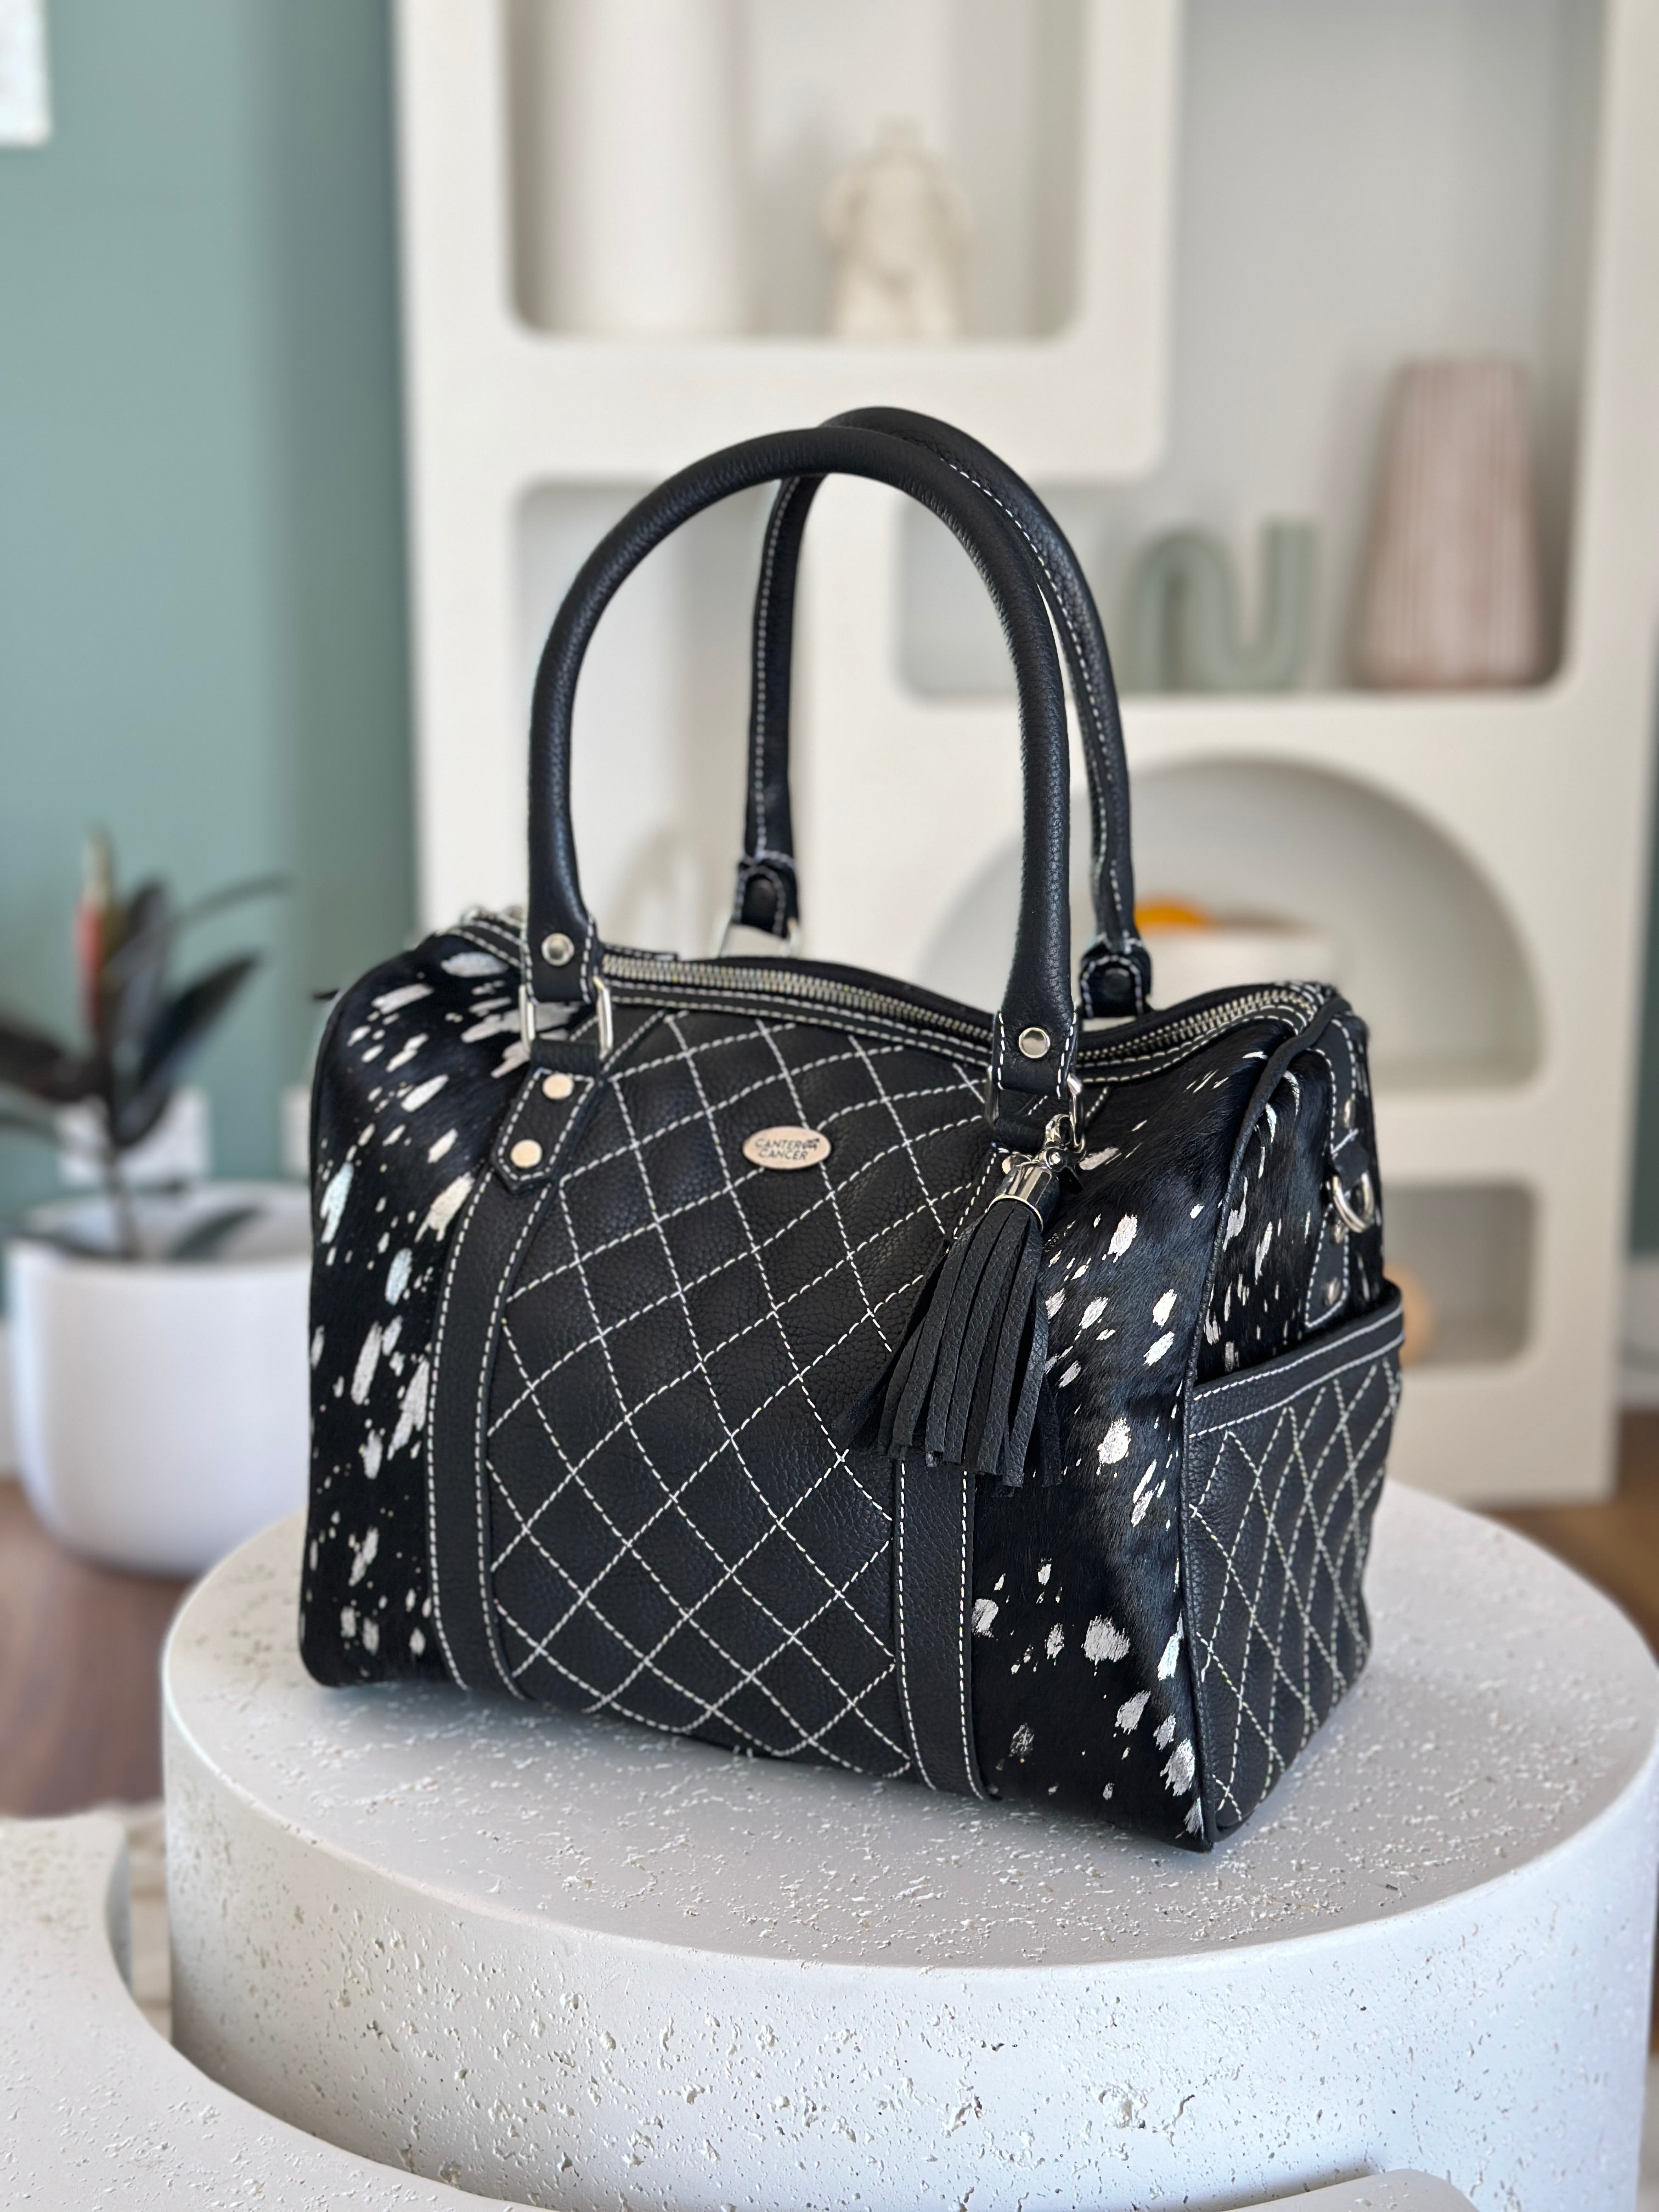 Silver Speckle Cowhide and Black Leather Handbag